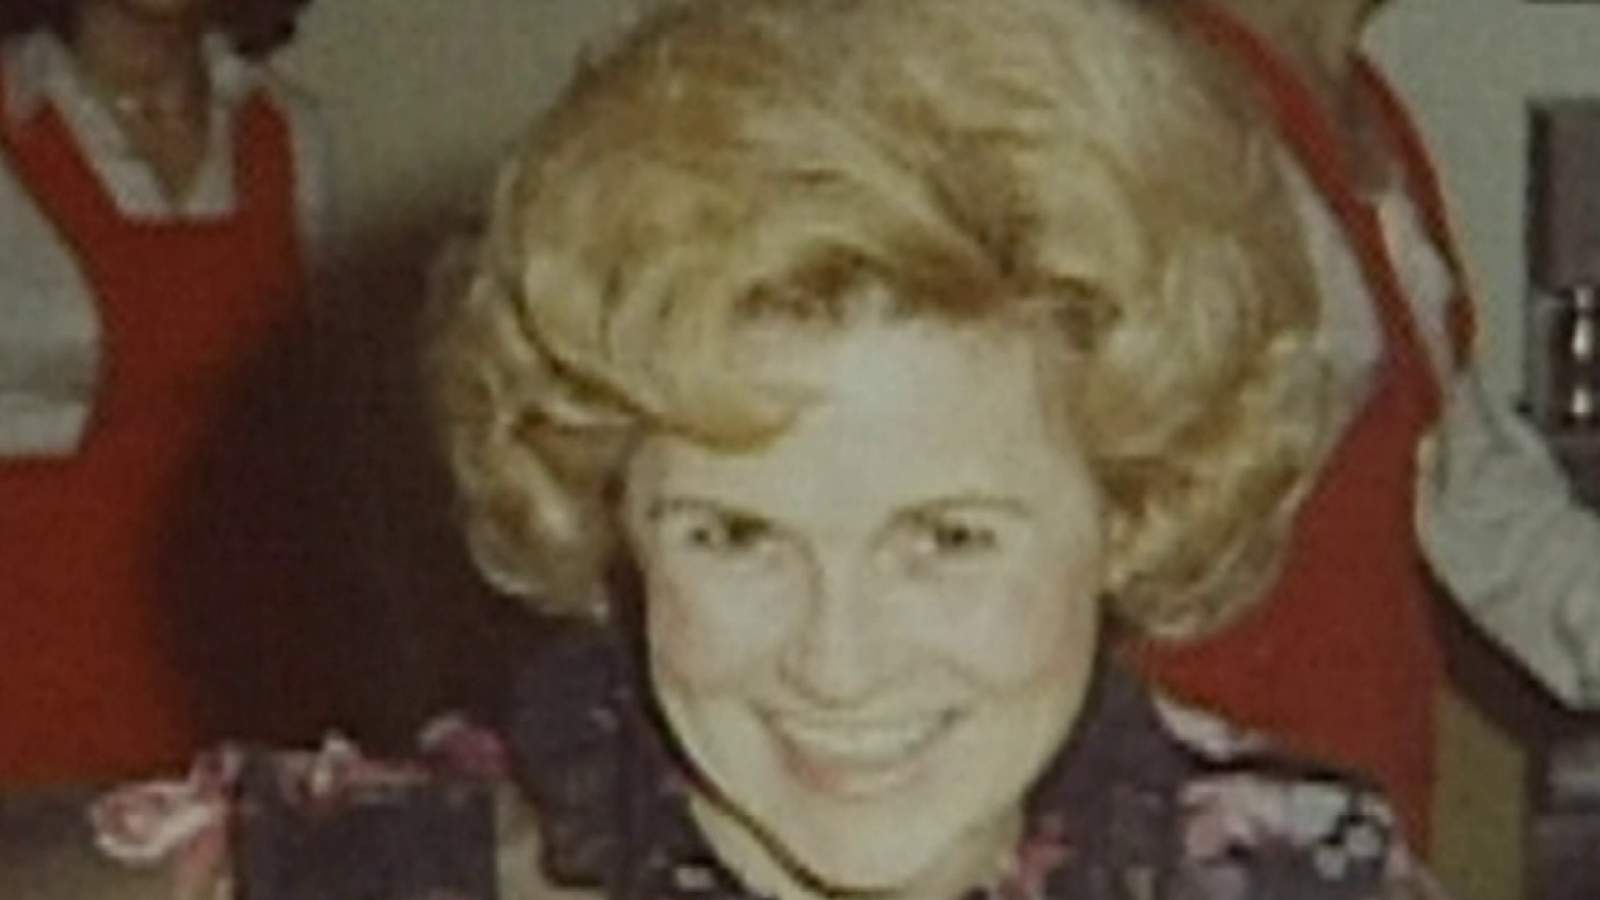 Troy police revisit case of mother who was beaten to death in apartment 42 years ago